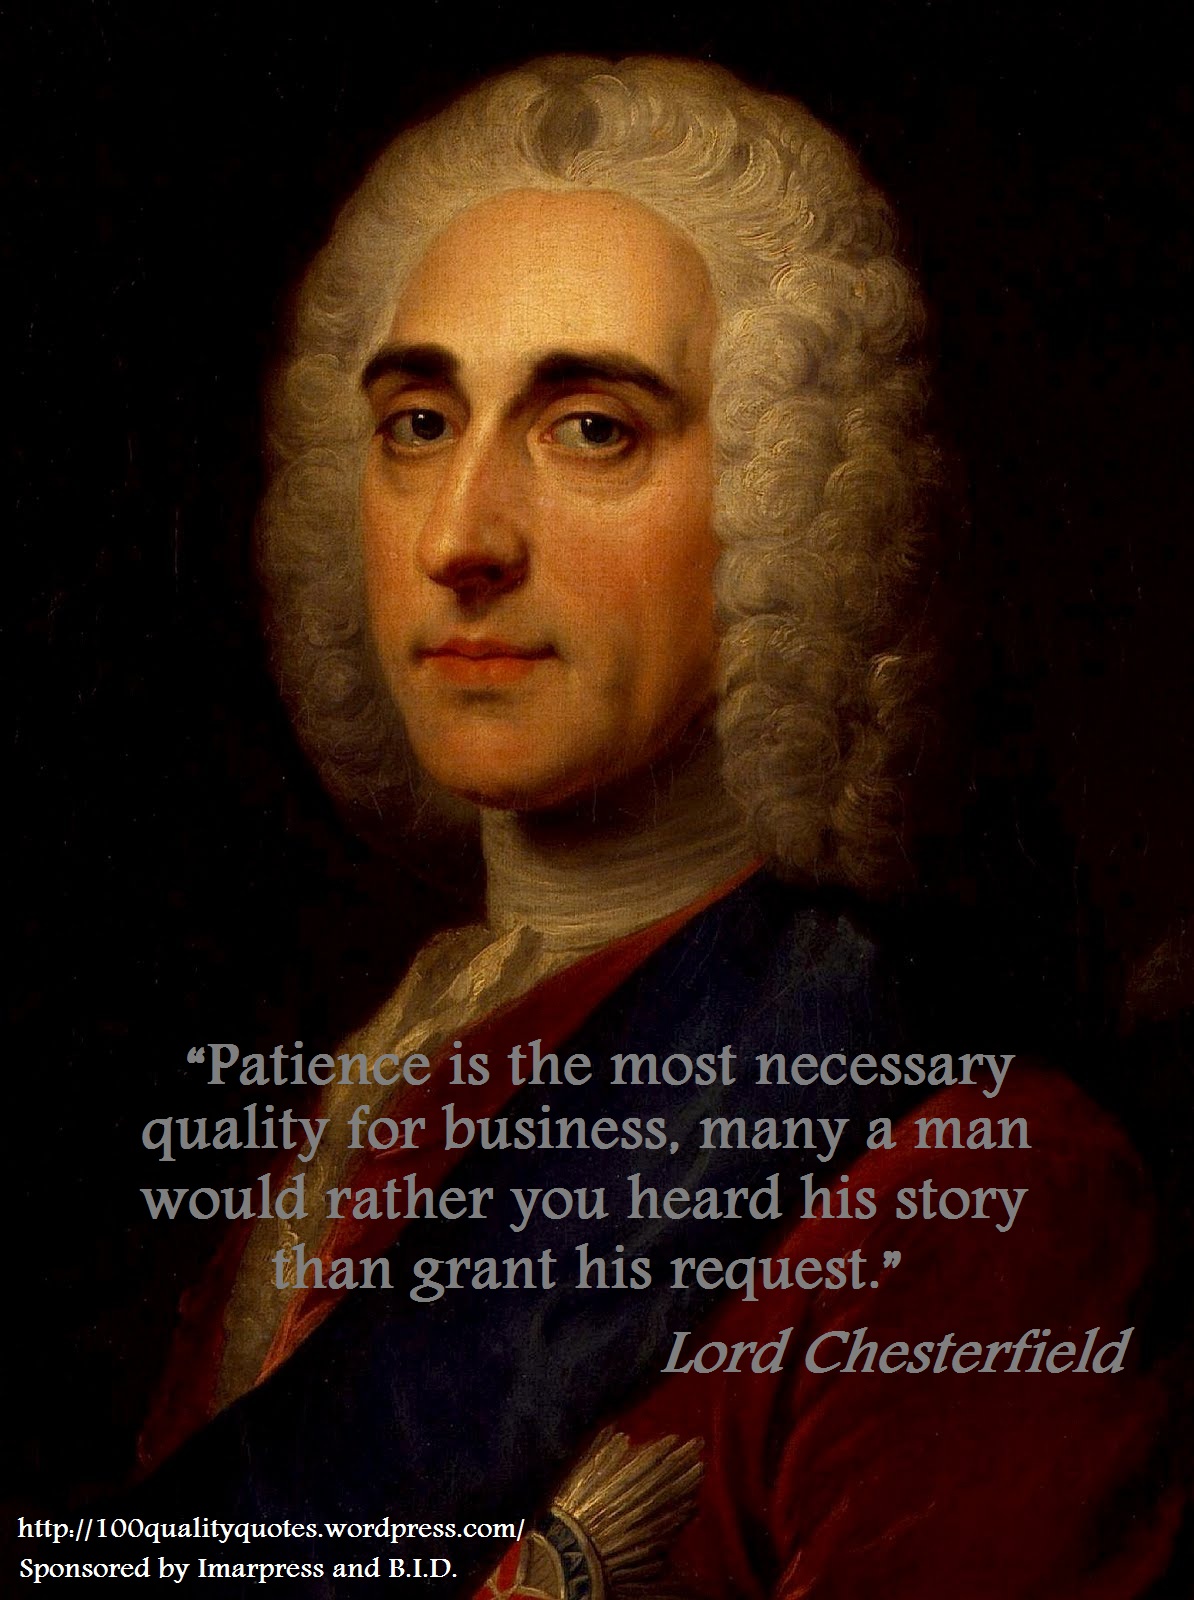 Lord Chesterfield Quote: “Swift speedy time, feathered with flying hours,  Dissolves the beauty of the fairest